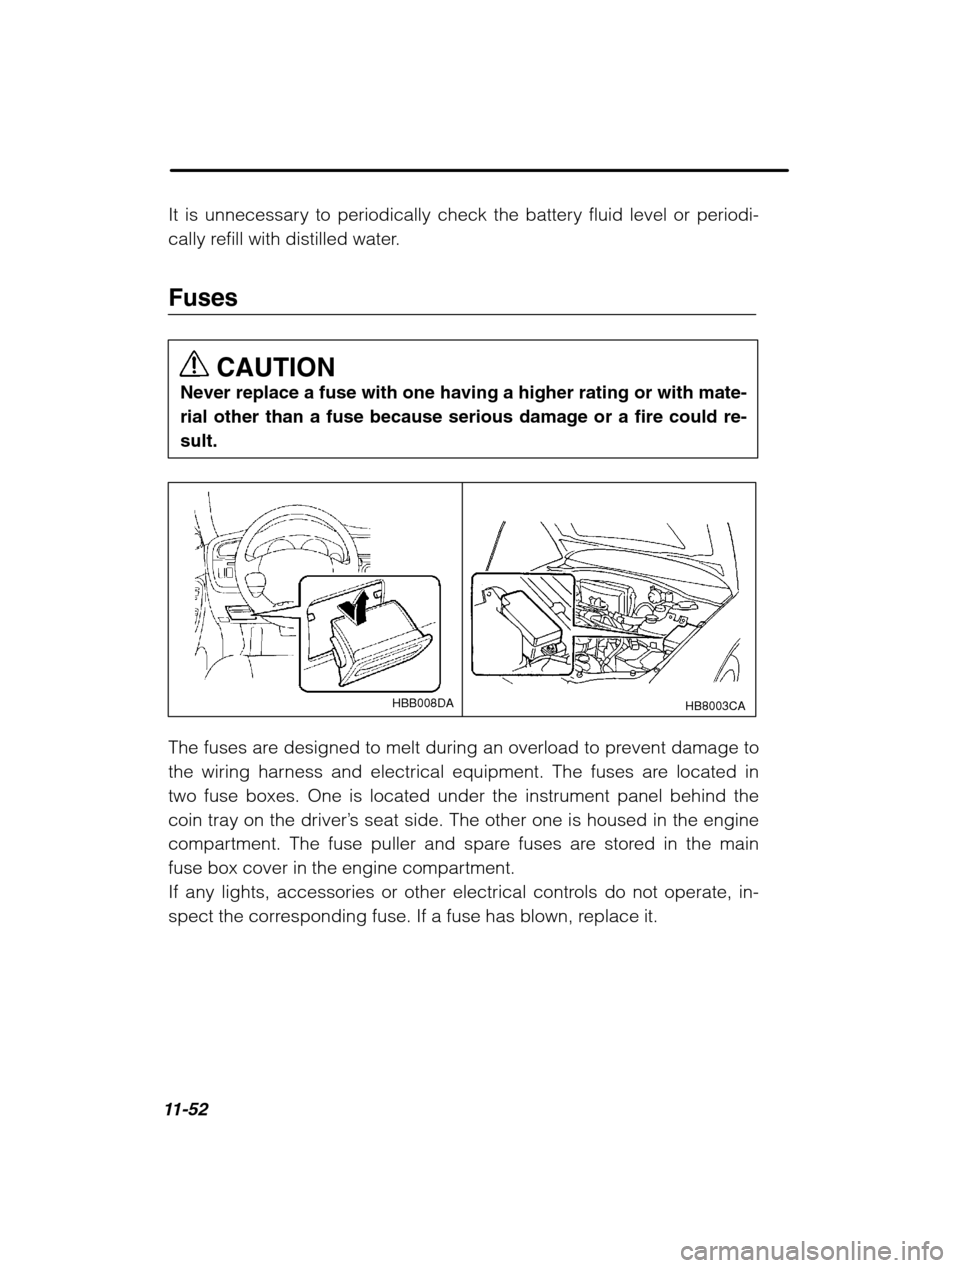 SUBARU LEGACY 2002 3.G Owners Manual 11-52
It is unnecessary to periodically check the battery fluid level or periodi- 
cally refill with distilled water. FusesCAUTION
Never replace a fuse with one having a higher rating or with mate- 
r